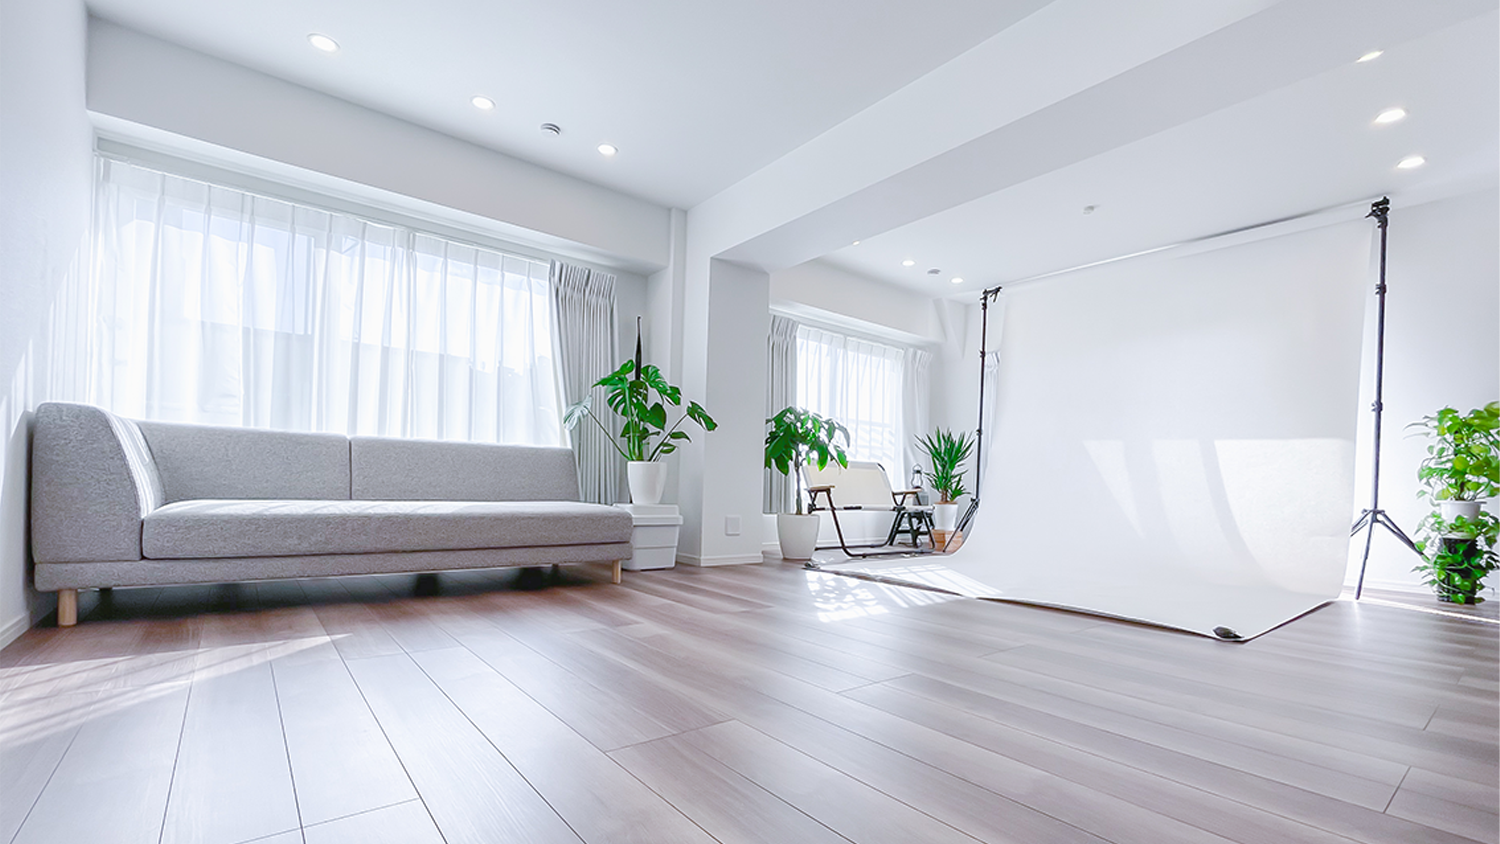 Bright, minimalist Tokyo photo studio with tons of natural light.